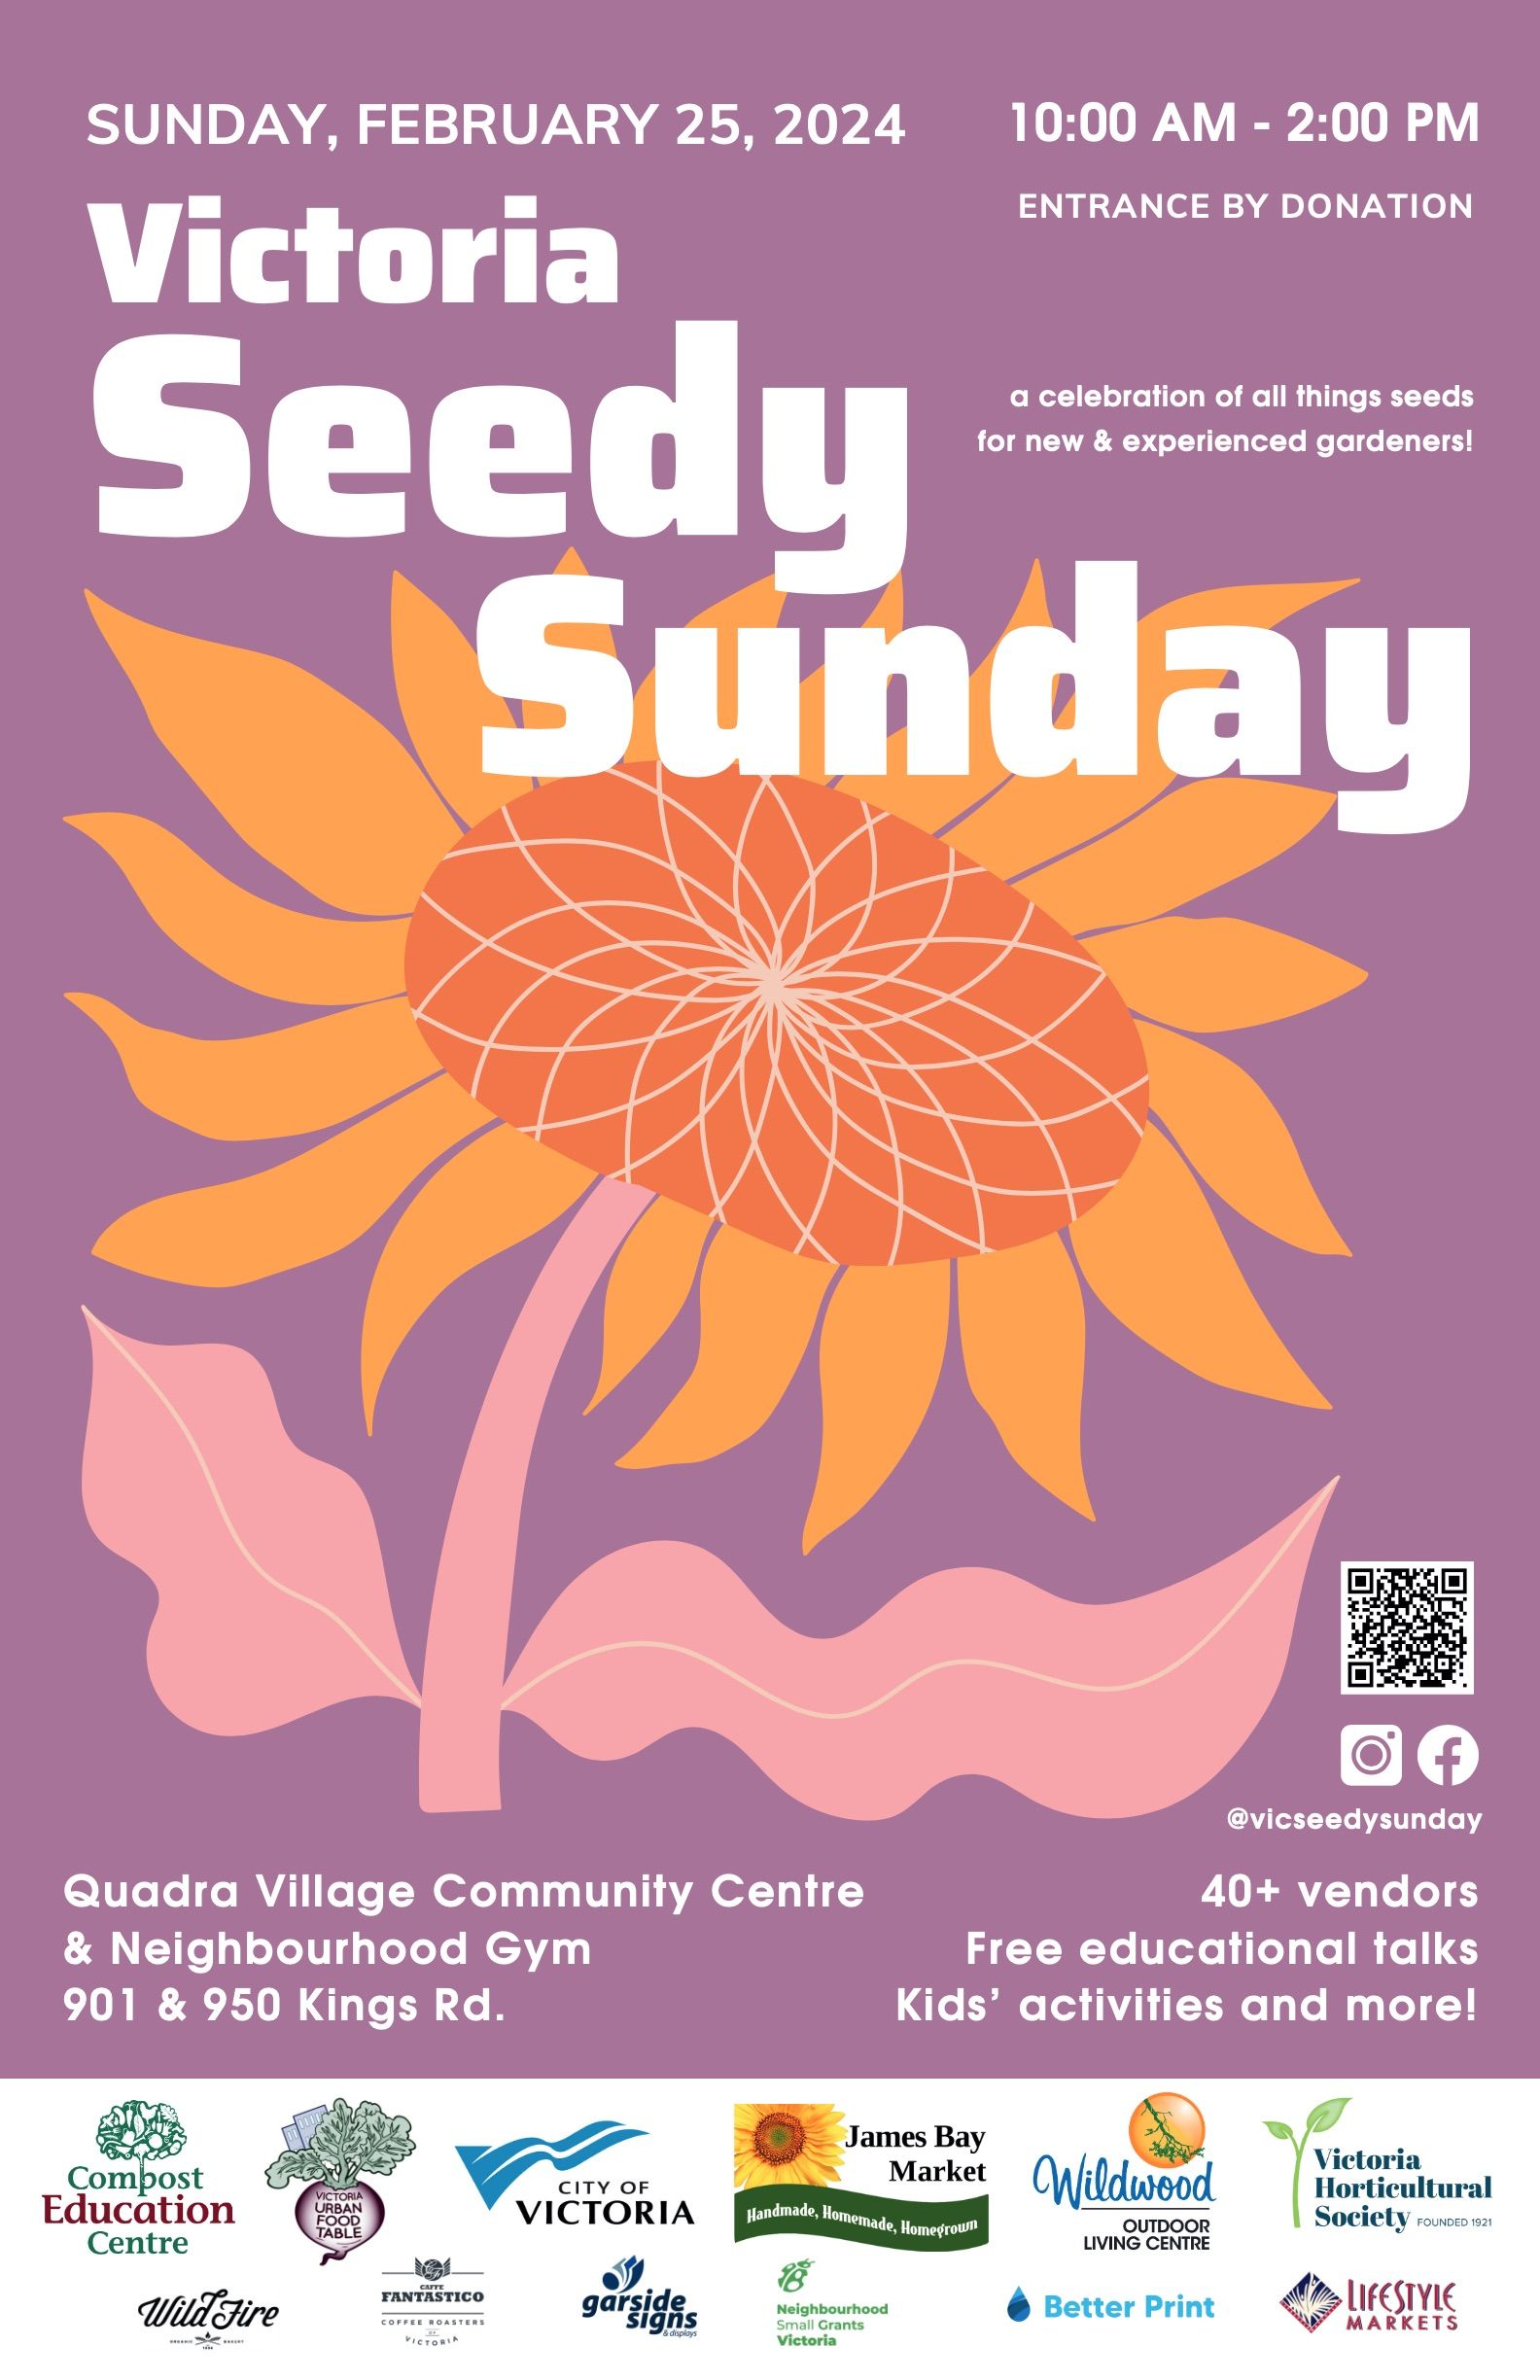 Victoria Seedy Sunday Poster (11 x 17 in)-2